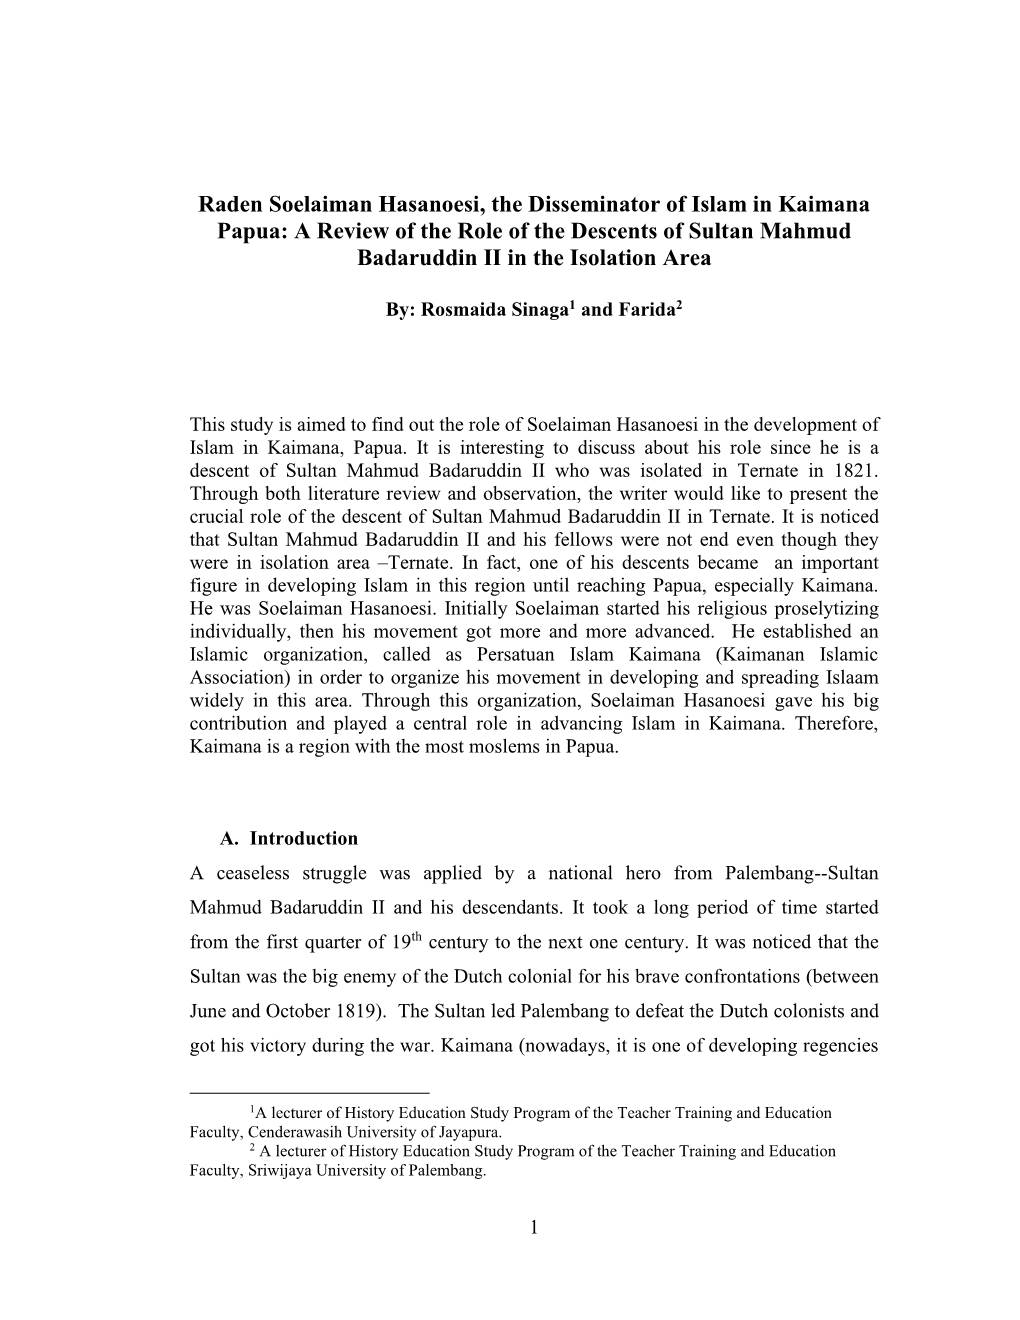 Raden Soelaiman Hasanoesi, the Disseminator of Islam in Kaimana Papua: a Review of the Role of the Descents of Sultan Mahmud Badaruddin II in the Isolation Area